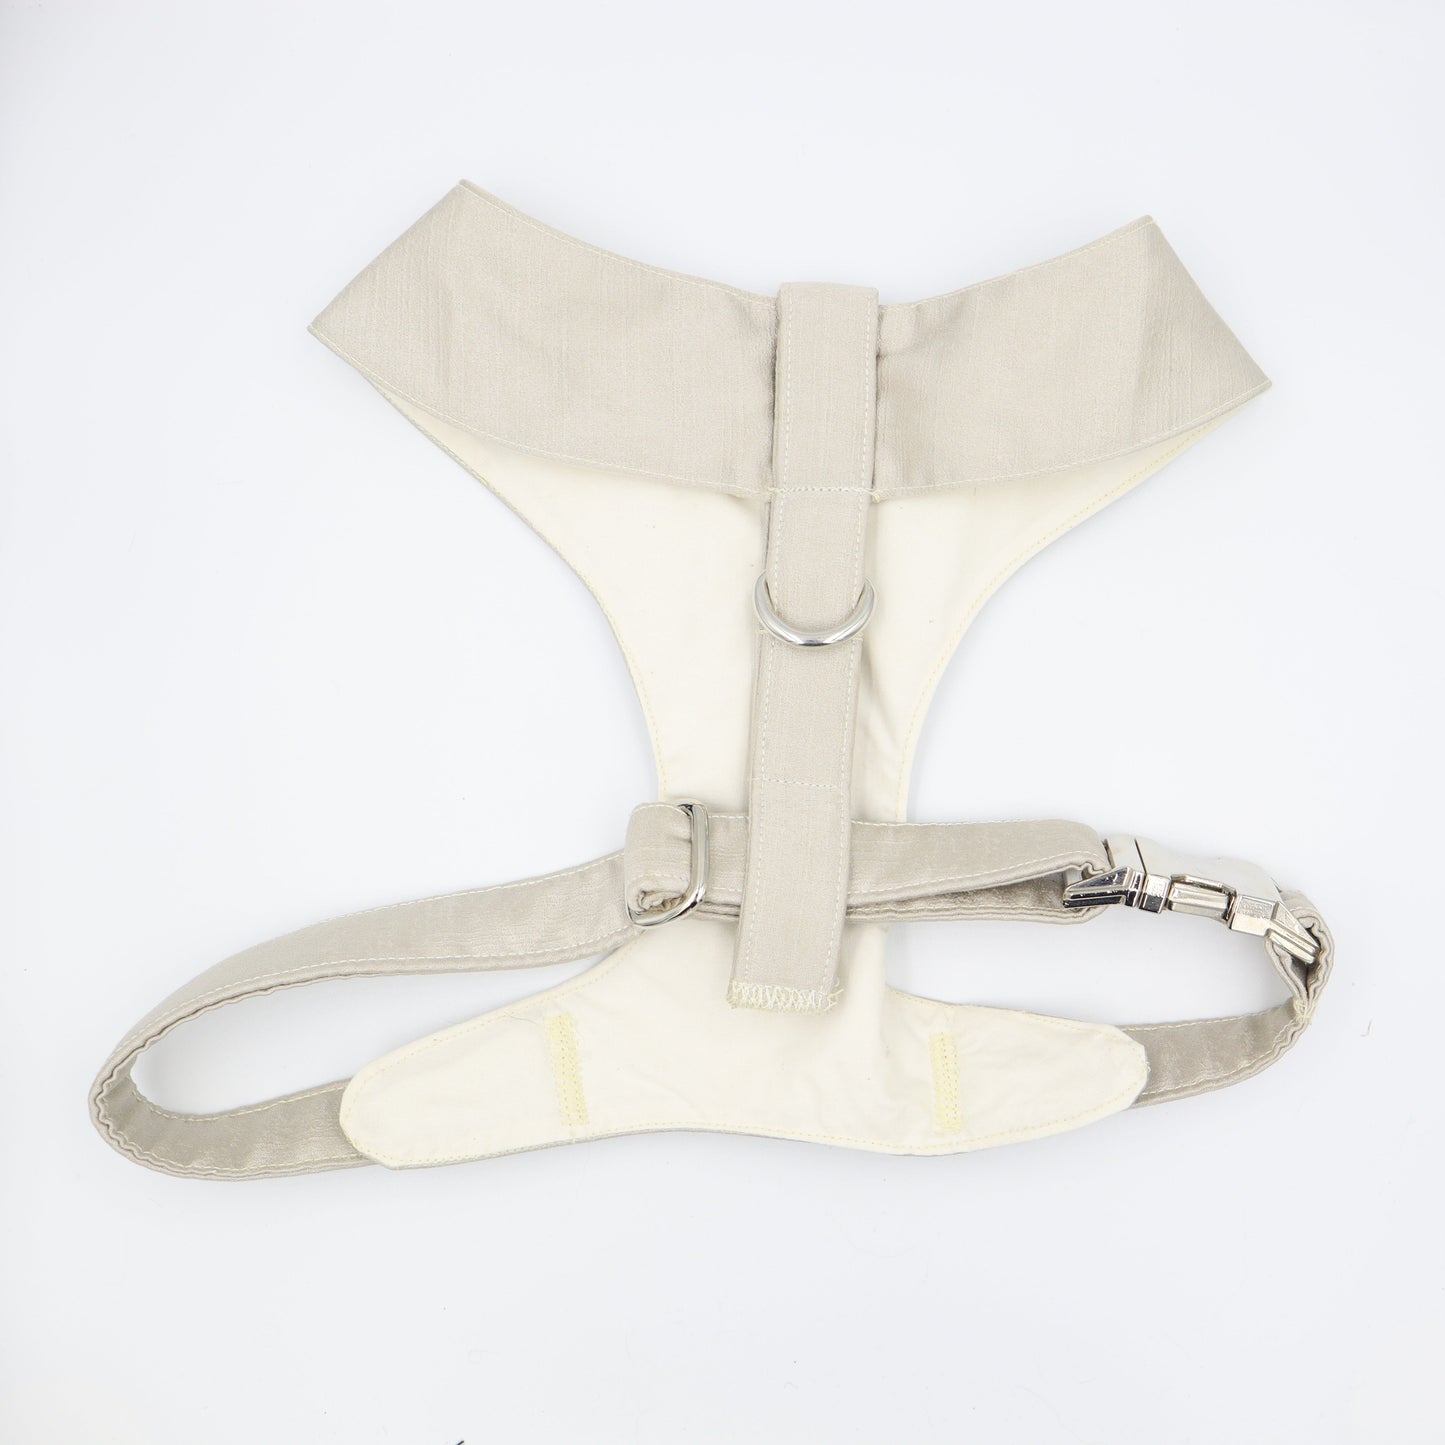 Tuxedo Wedding Dog Harness in Beige Natural Shot Silk Satin with Mauve Bow CHOICE of COLOURS